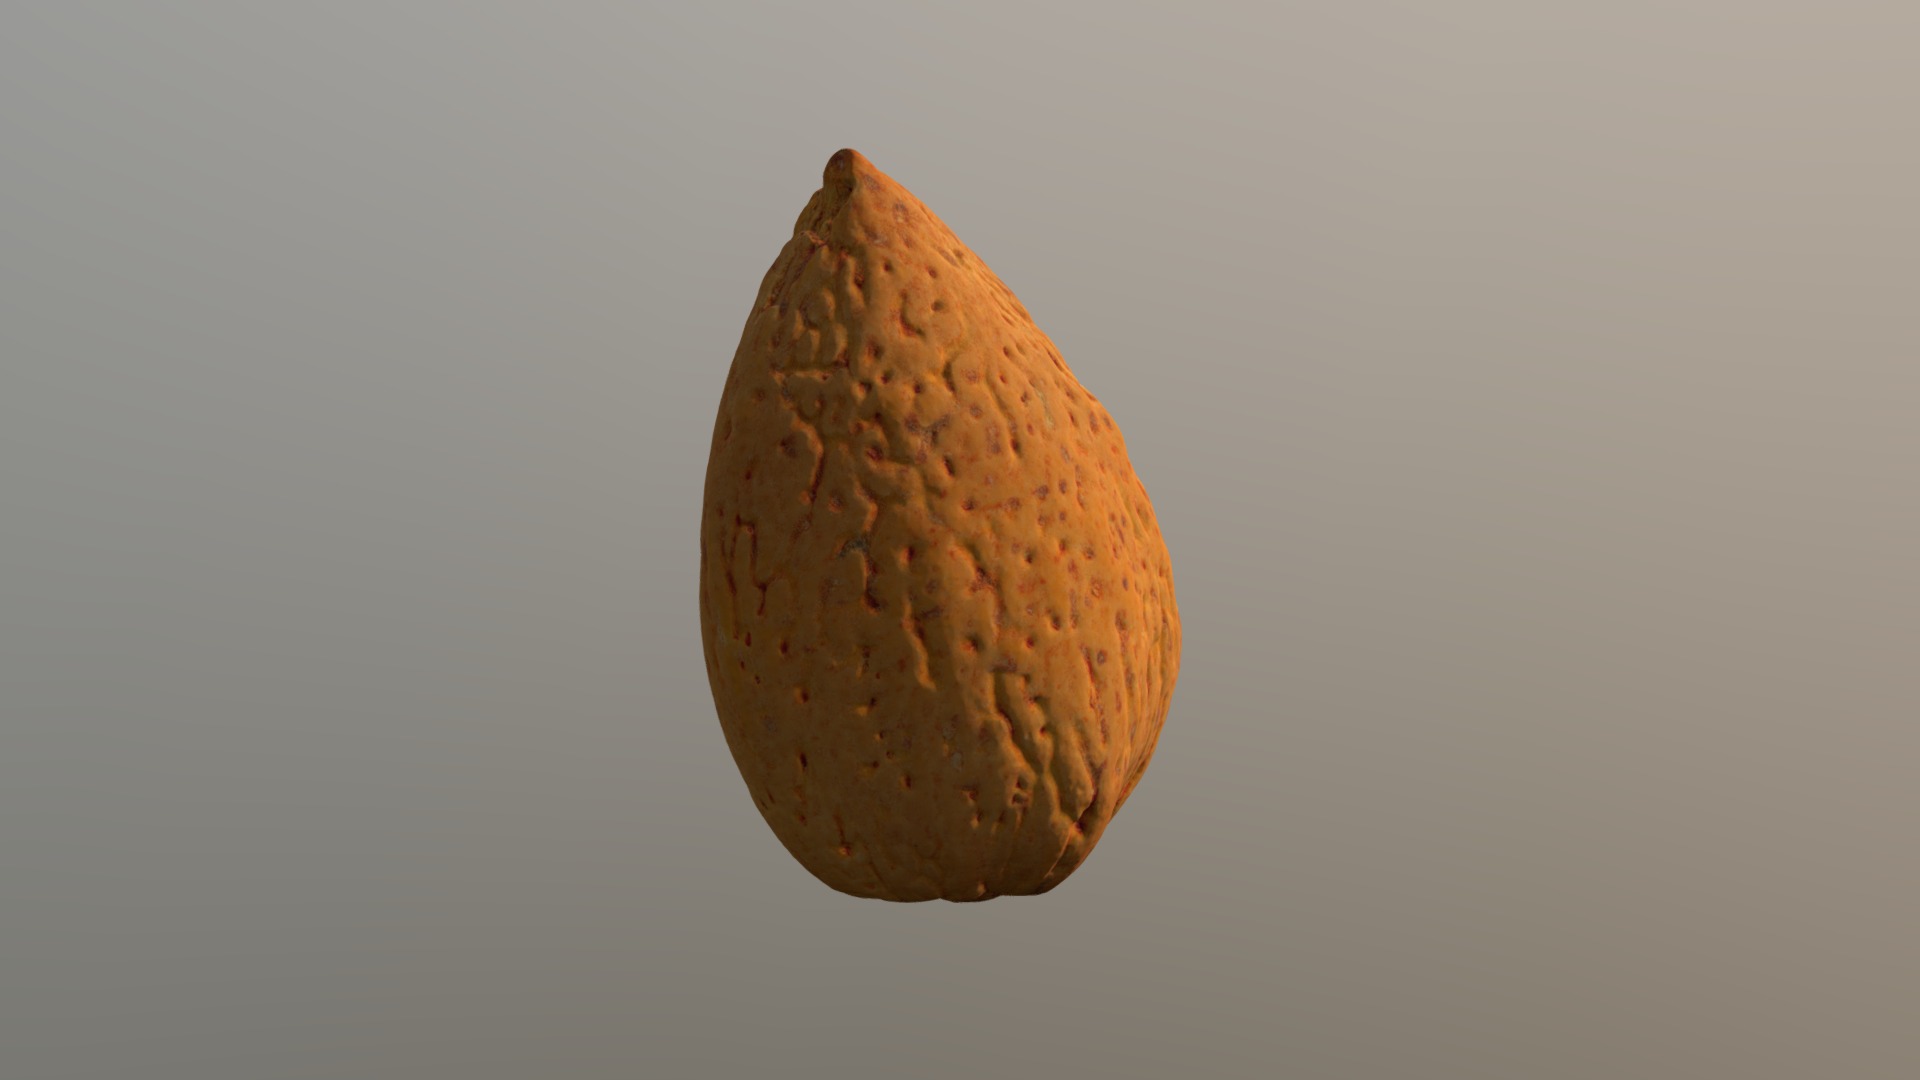 3D model almond nut – high resolution - This is a 3D model of the almond nut - high resolution. The 3D model is about a potato with a black background.